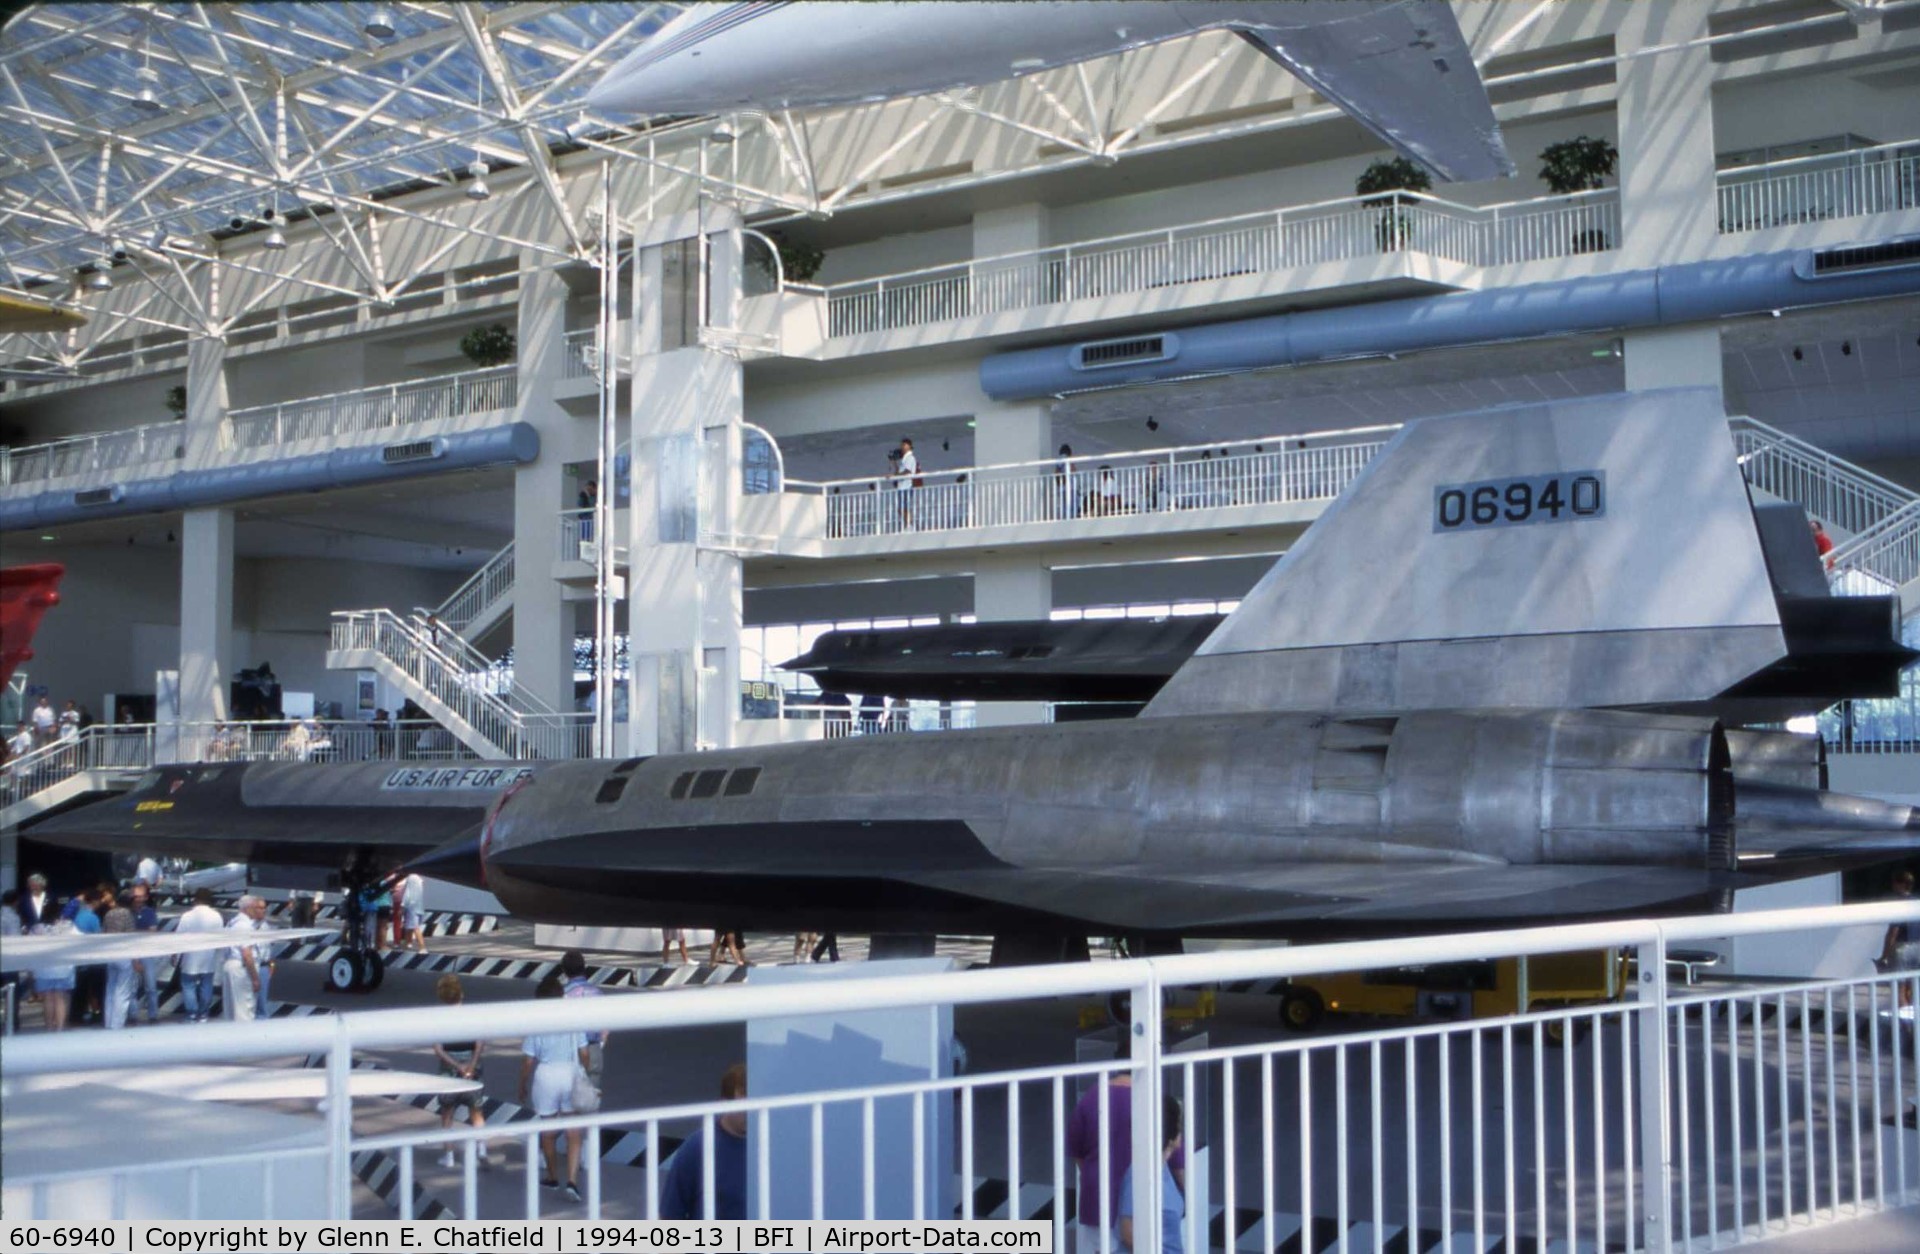 60-6940, 1962 Lockheed A-11 Blackbird C/N 134, A-11 (A-12) at the Boeing Museum of Flight